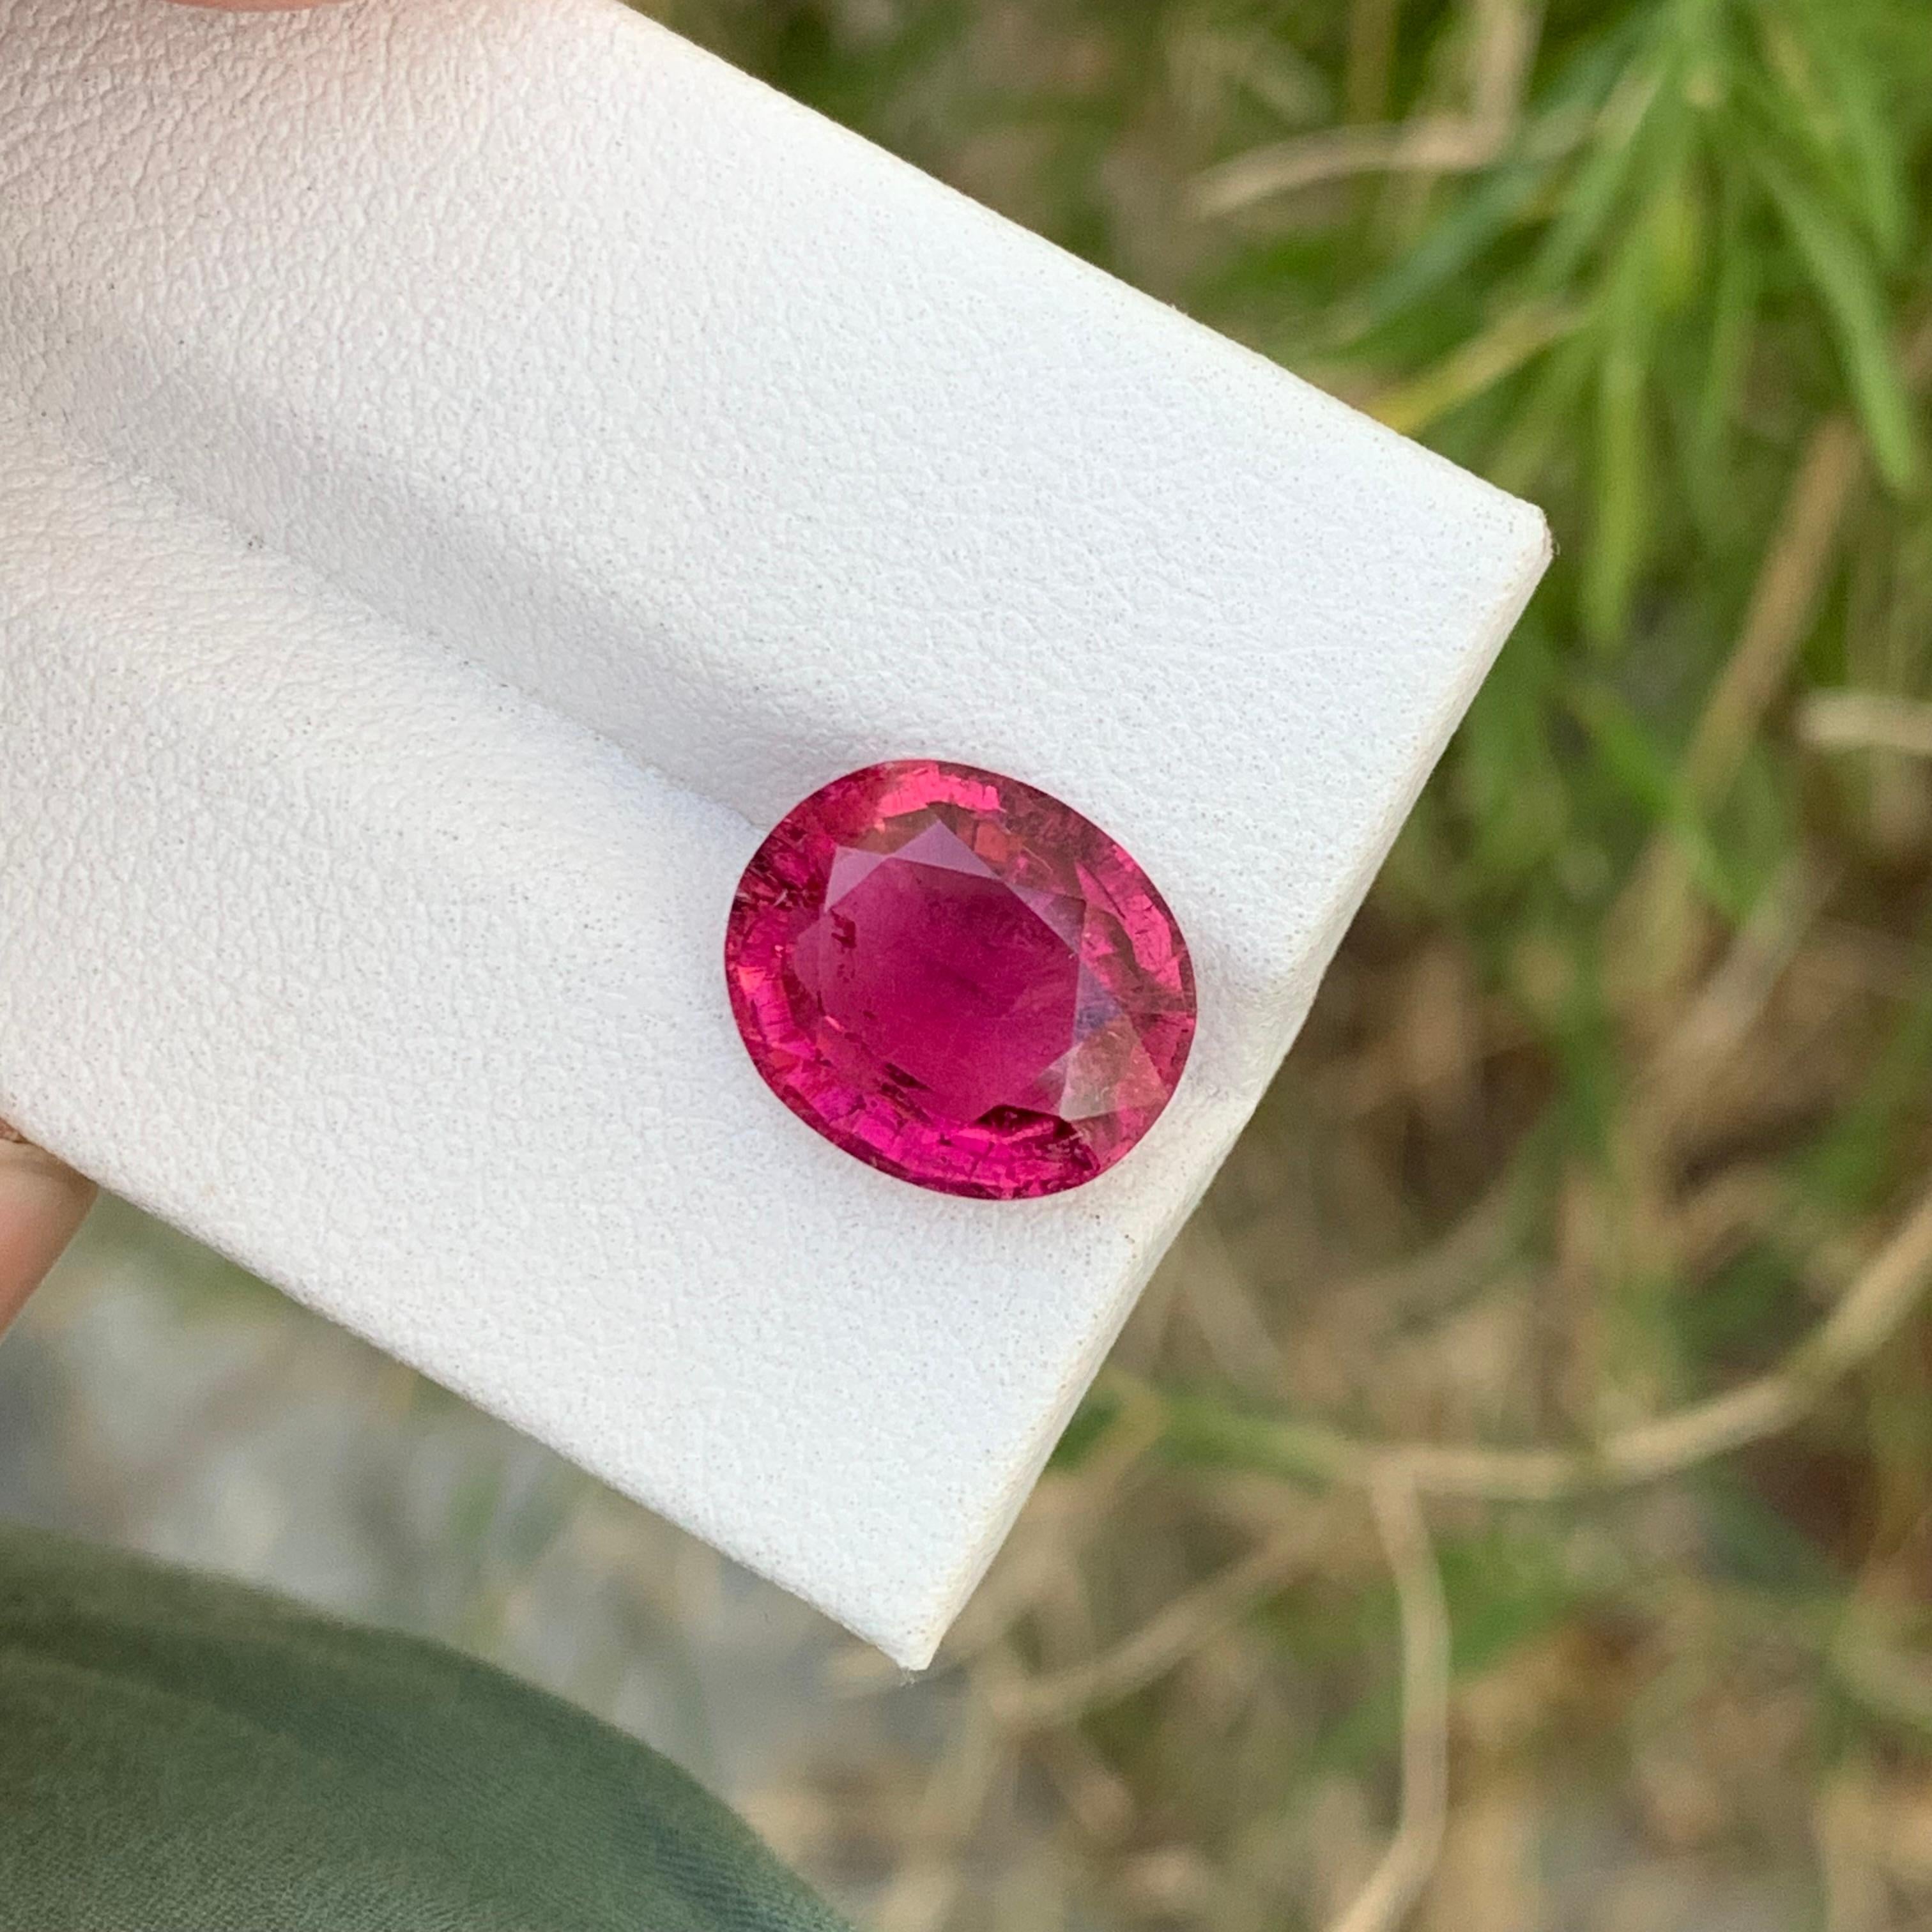 Women's or Men's 4.70 Carat Glamorous Loose Rubellite Tourmaline Oval Shape Gem For Jewellery  For Sale